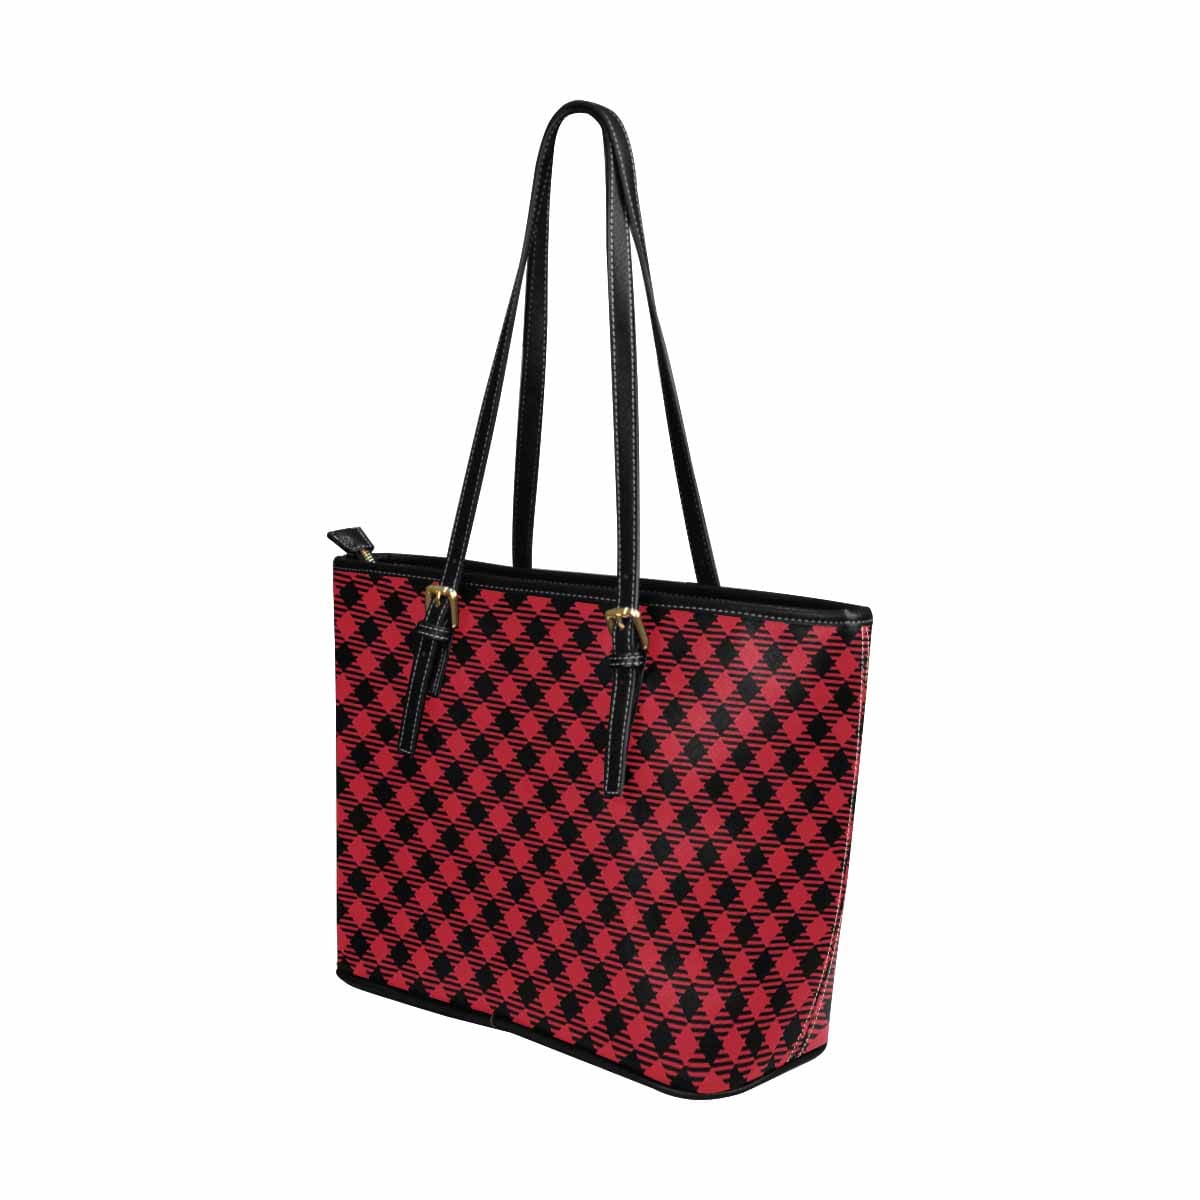 Large Leather Tote Shoulder Bag - Buffalo Plaid Red And Black S954657 - Bags